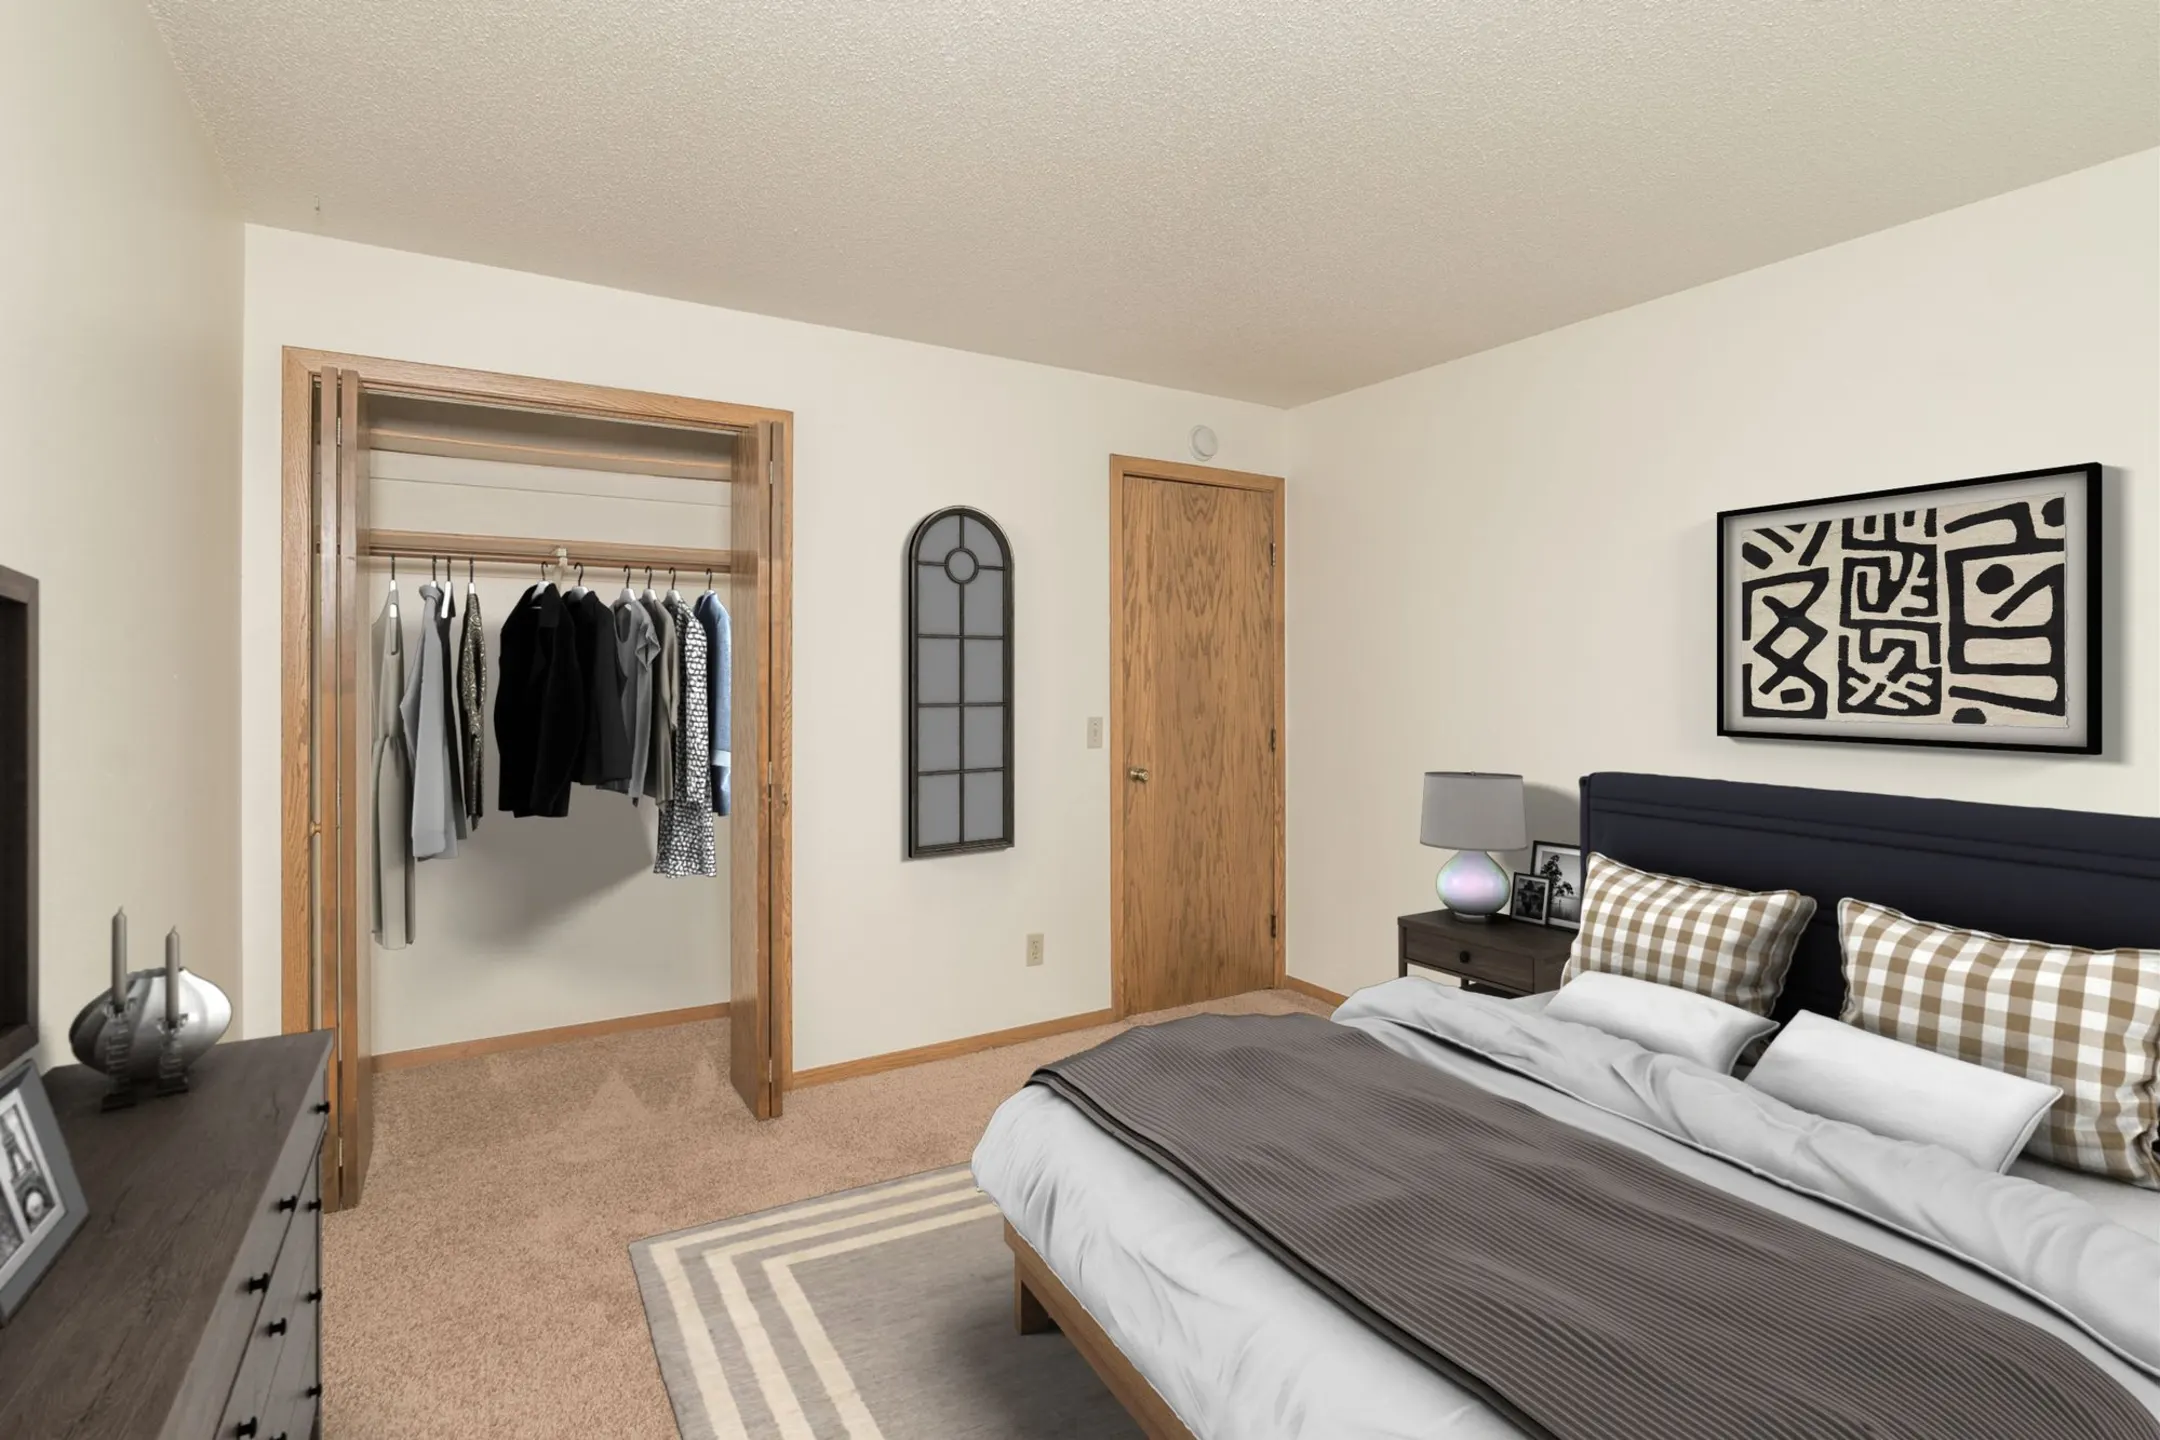 Bedroom - The Concorde Apartments - Sioux Falls, SD